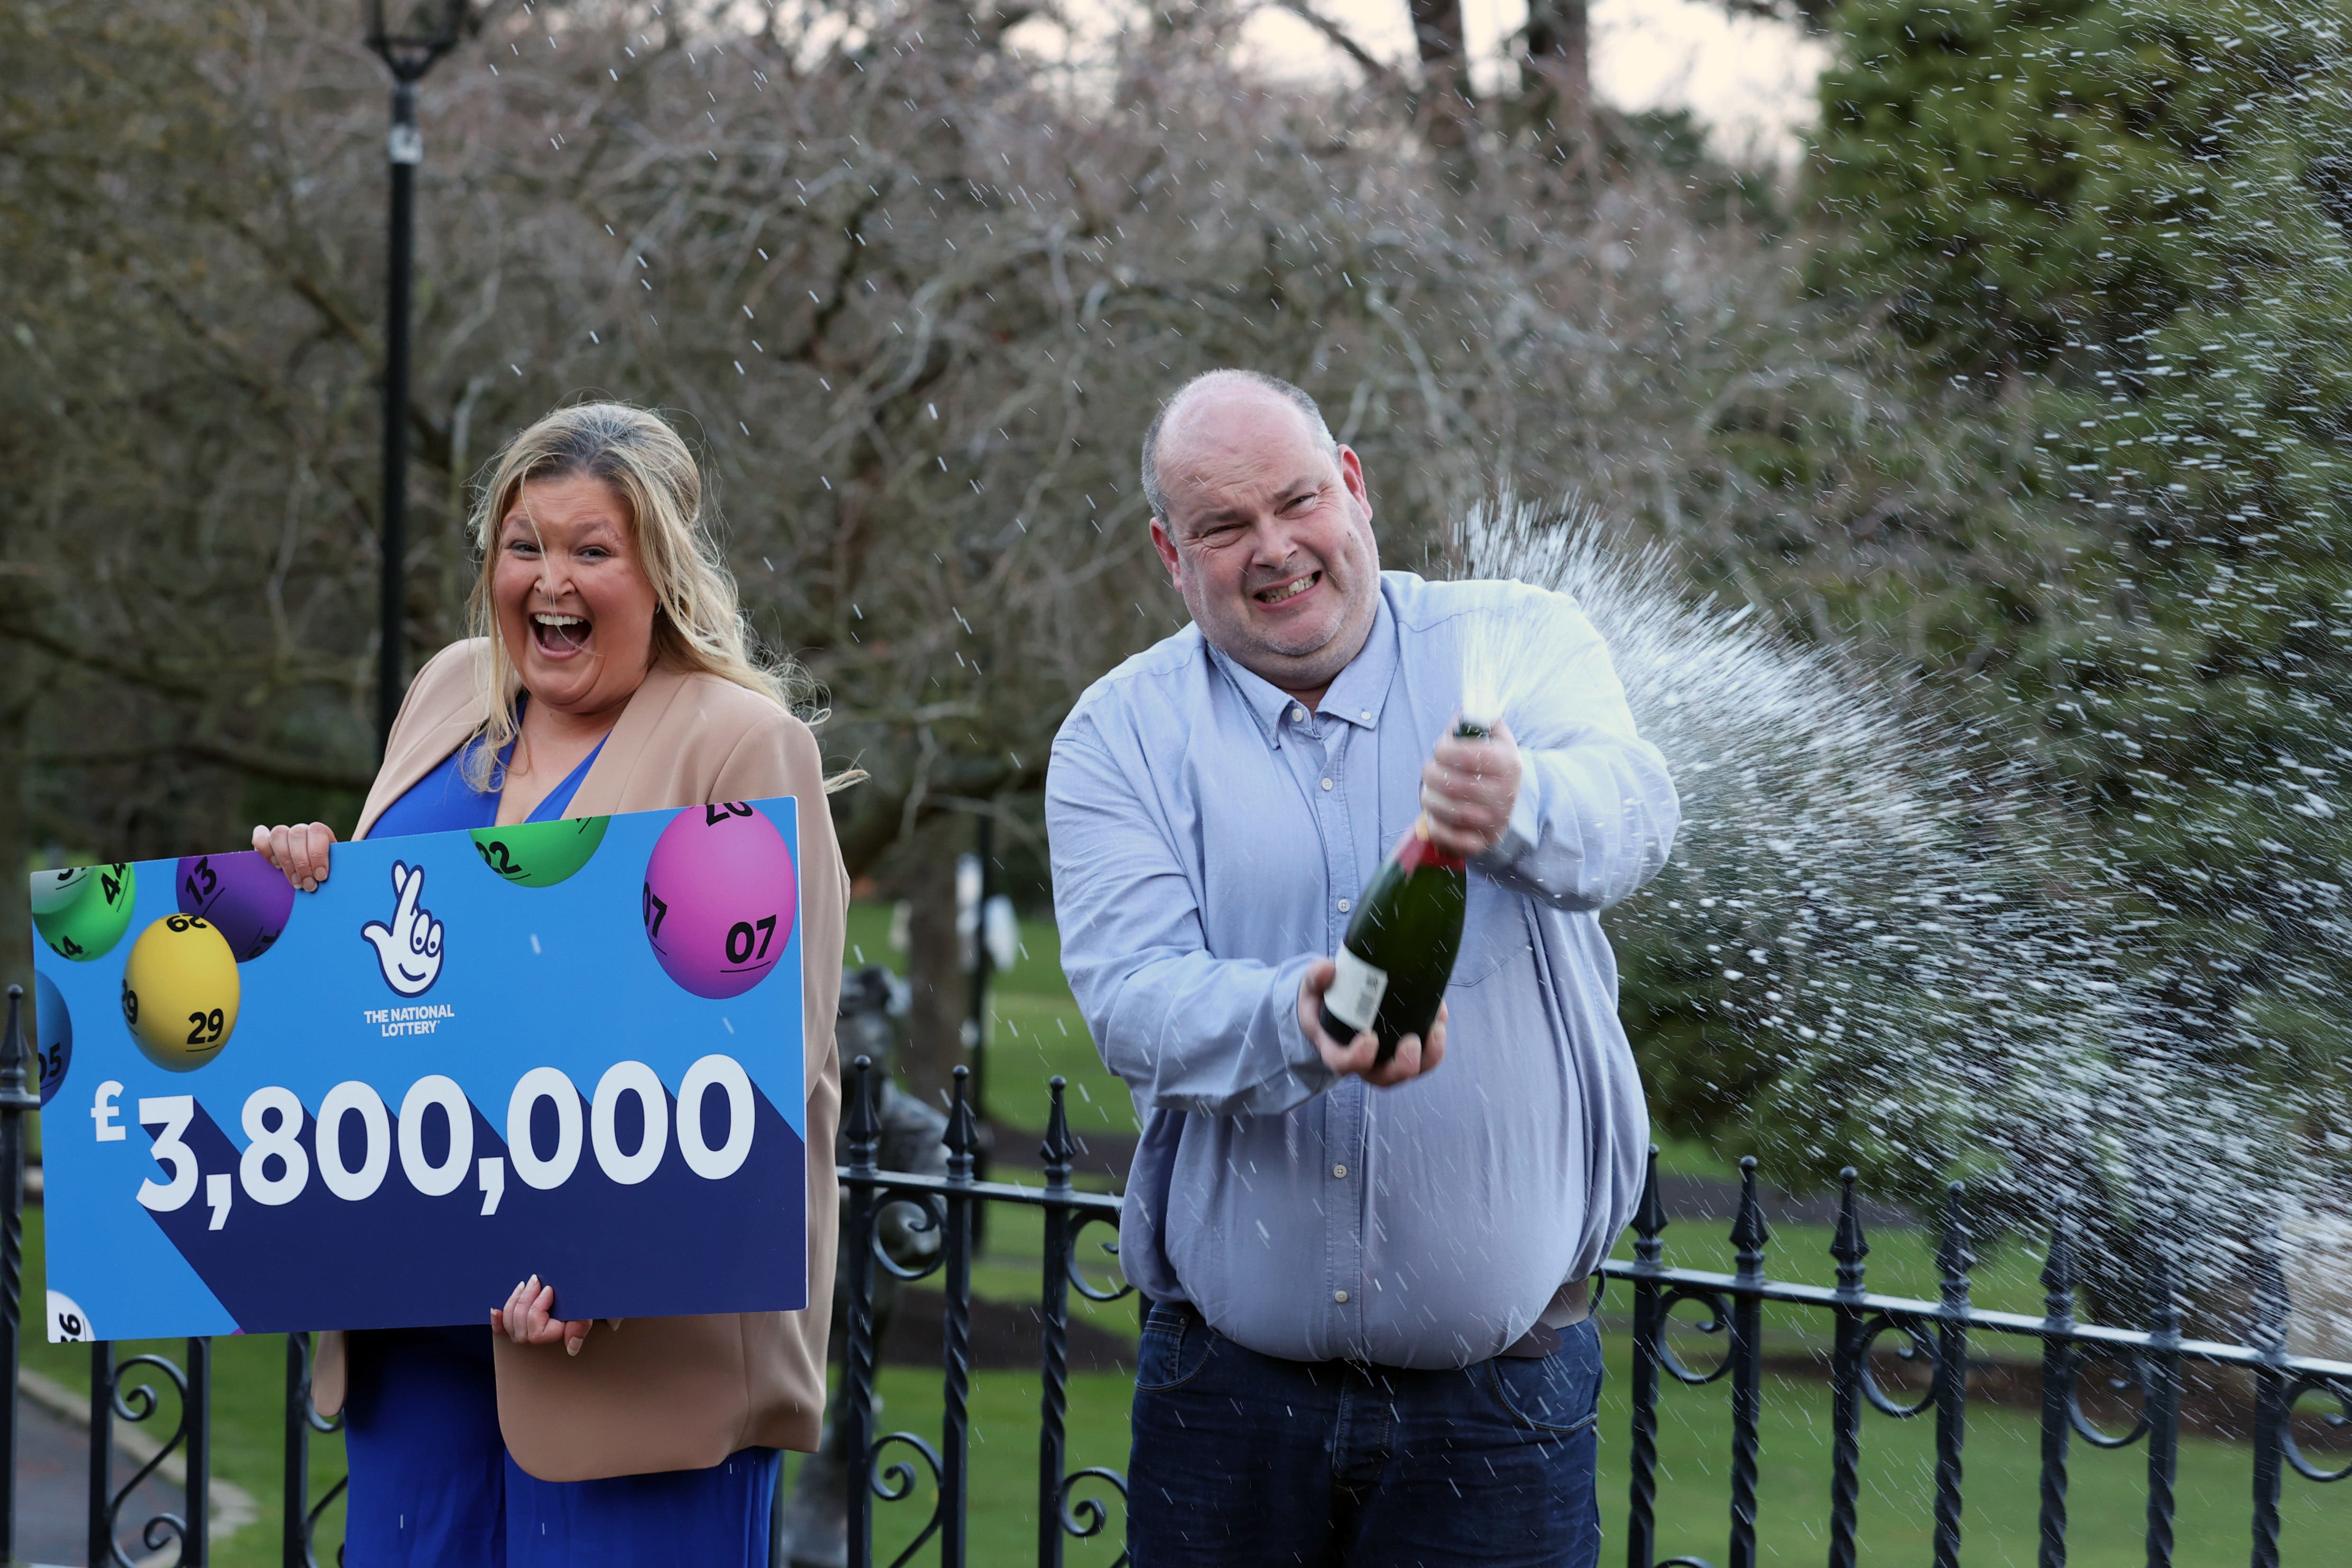 Supermarket delivery driver Jonny Johnston is planning to take his family abroad for the first time after winning a £3.8m Lotto jackpot just days before Christmas (Liam McBurney/PA)